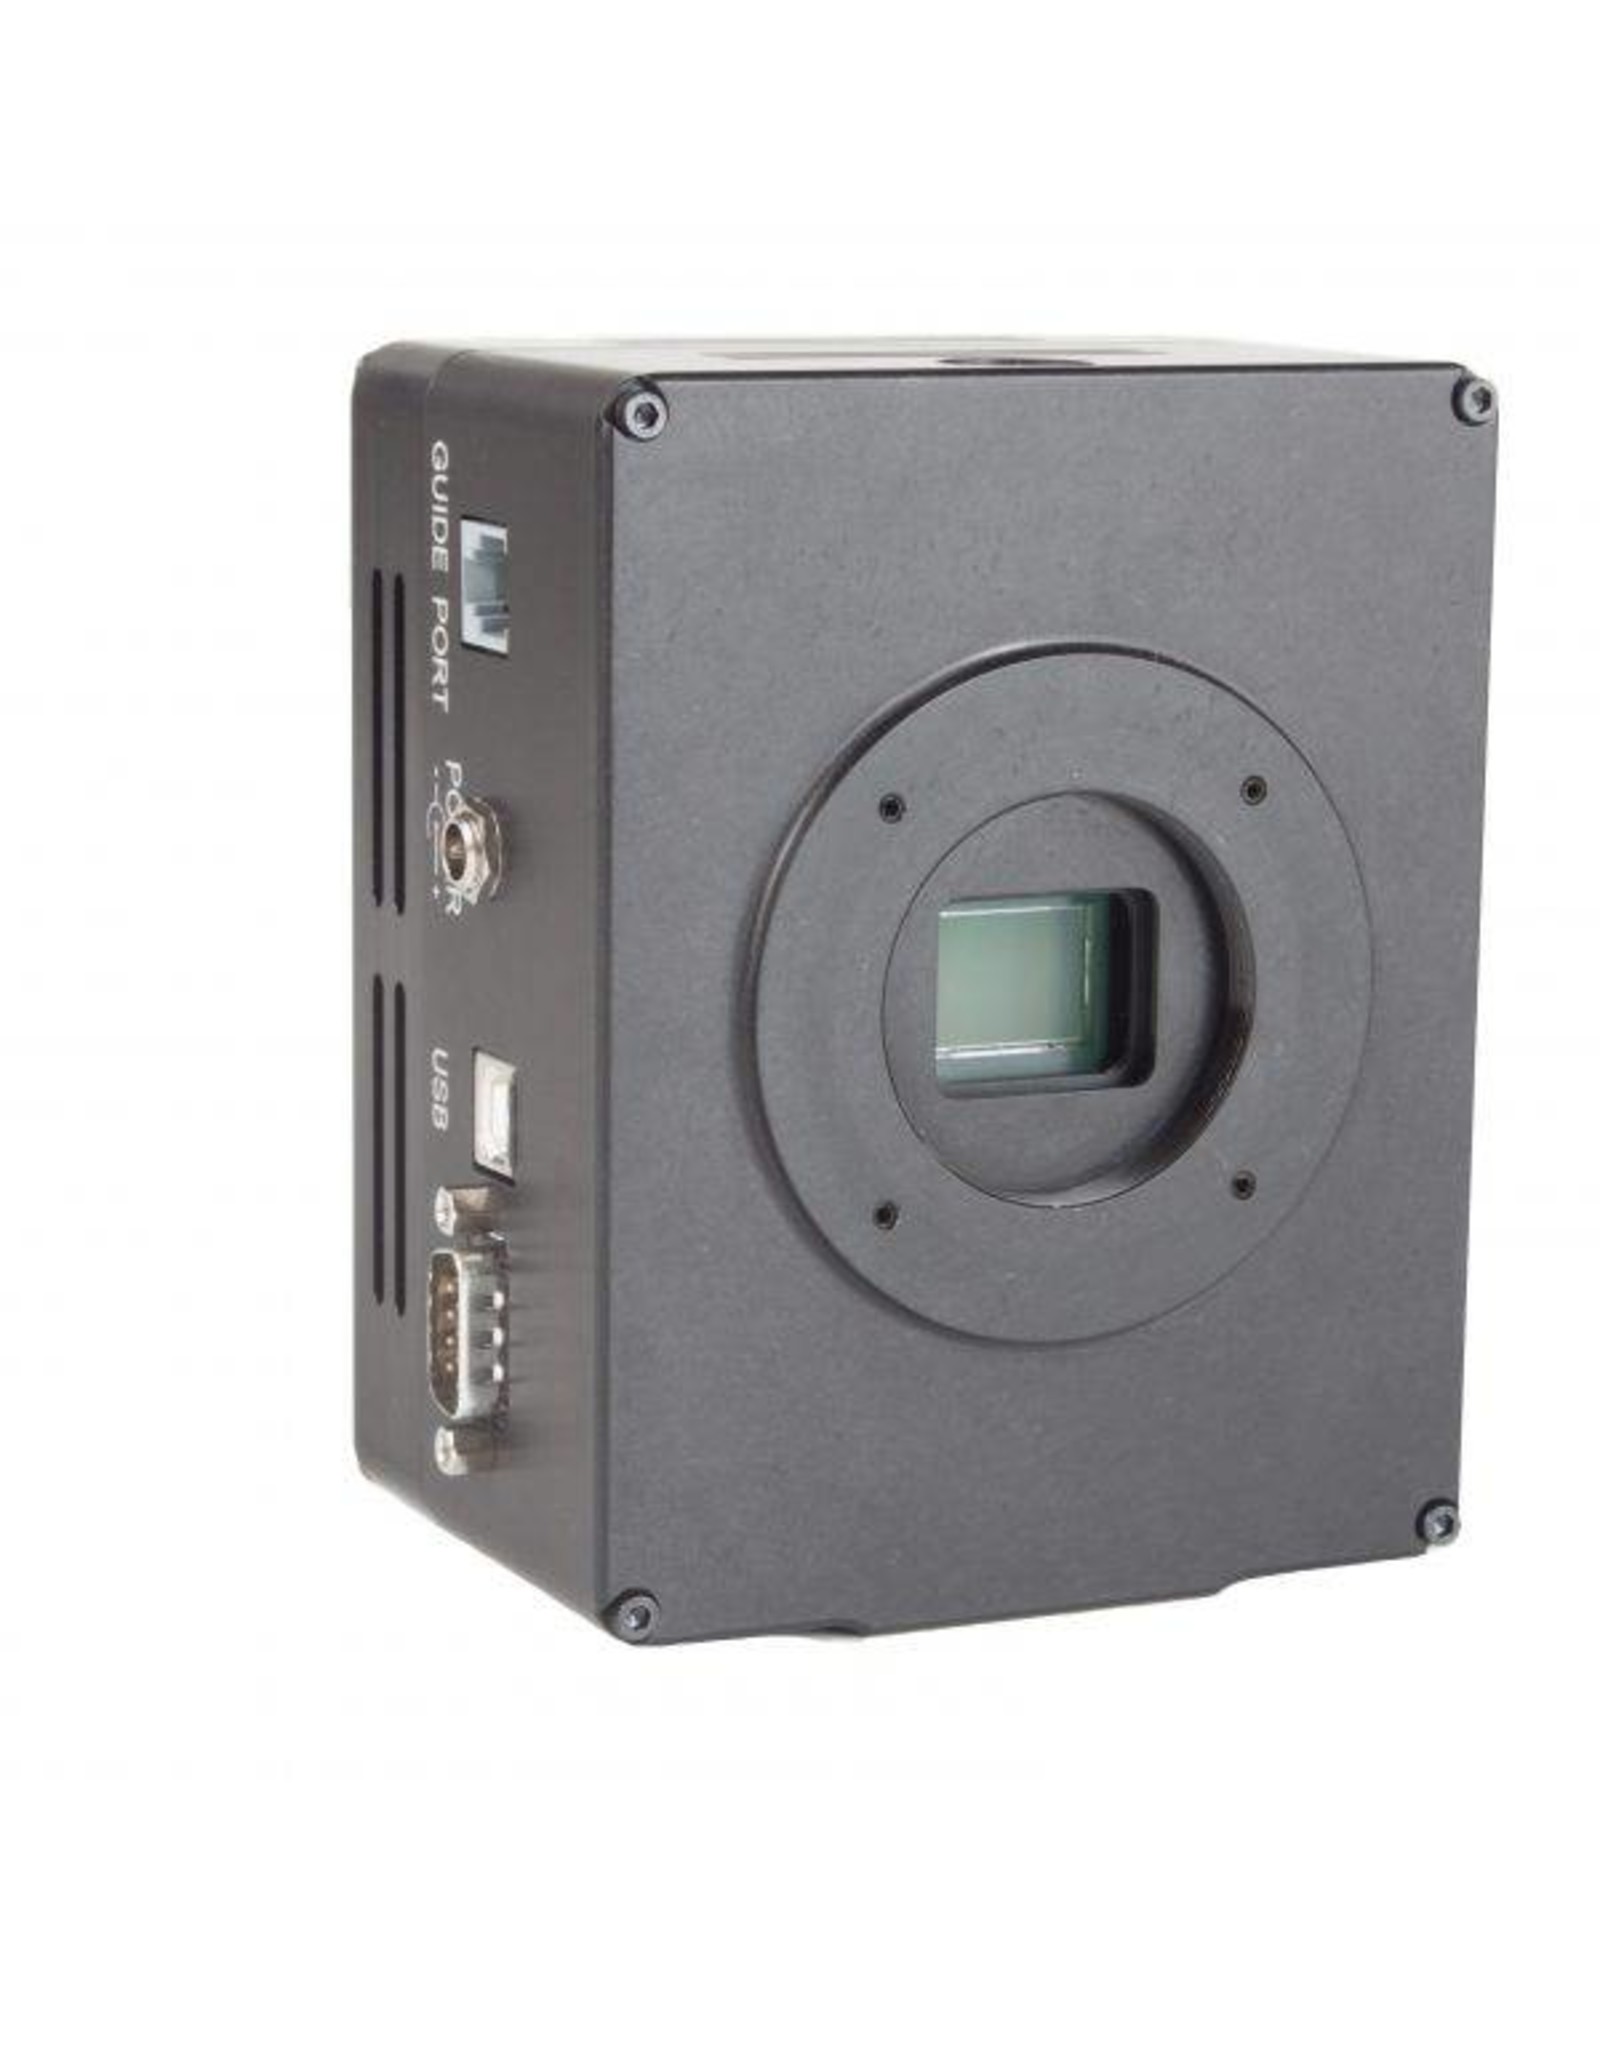 SBIG SBIG STF-4070-C (Bayer Color Filter) Color CCD Camera (LIMITED AVAILABILITY)